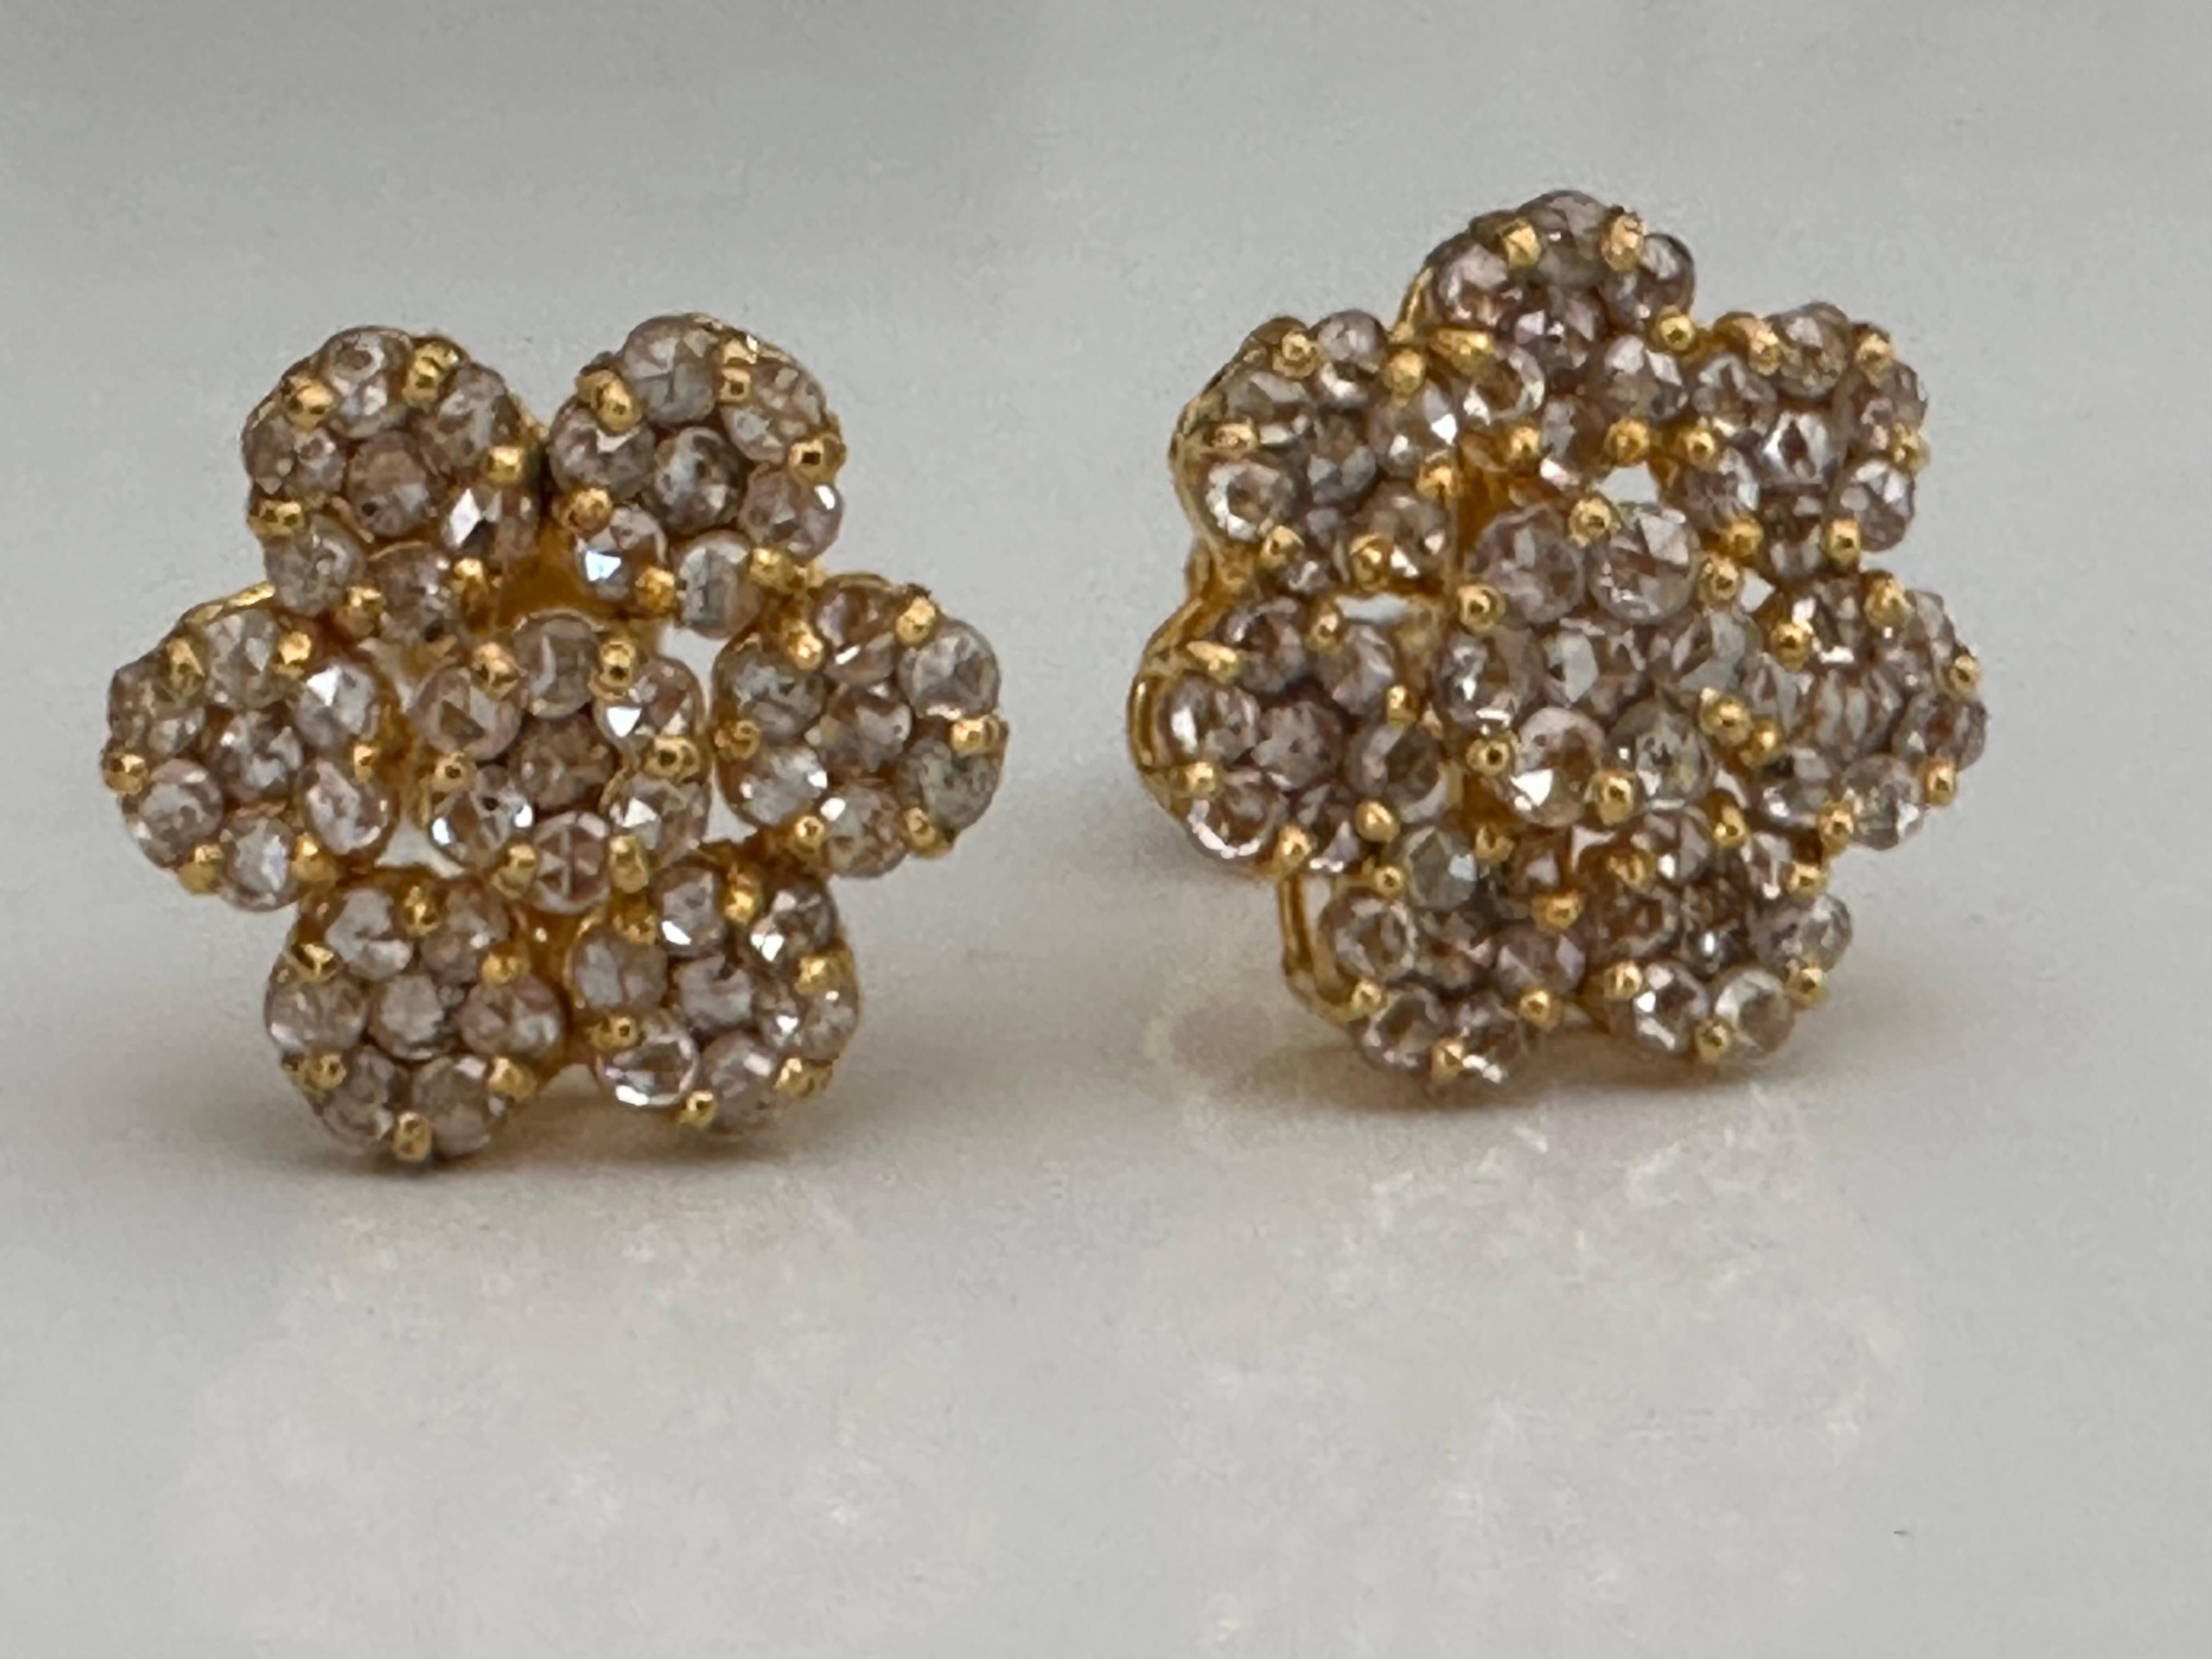 These antique flower-shaped stud earrings hand carved from 22K yellow gold feature ninety-eight rose cut diamonds totaling approximately 1.47 carats and secured with original screw back posts. Circa 1900. 
